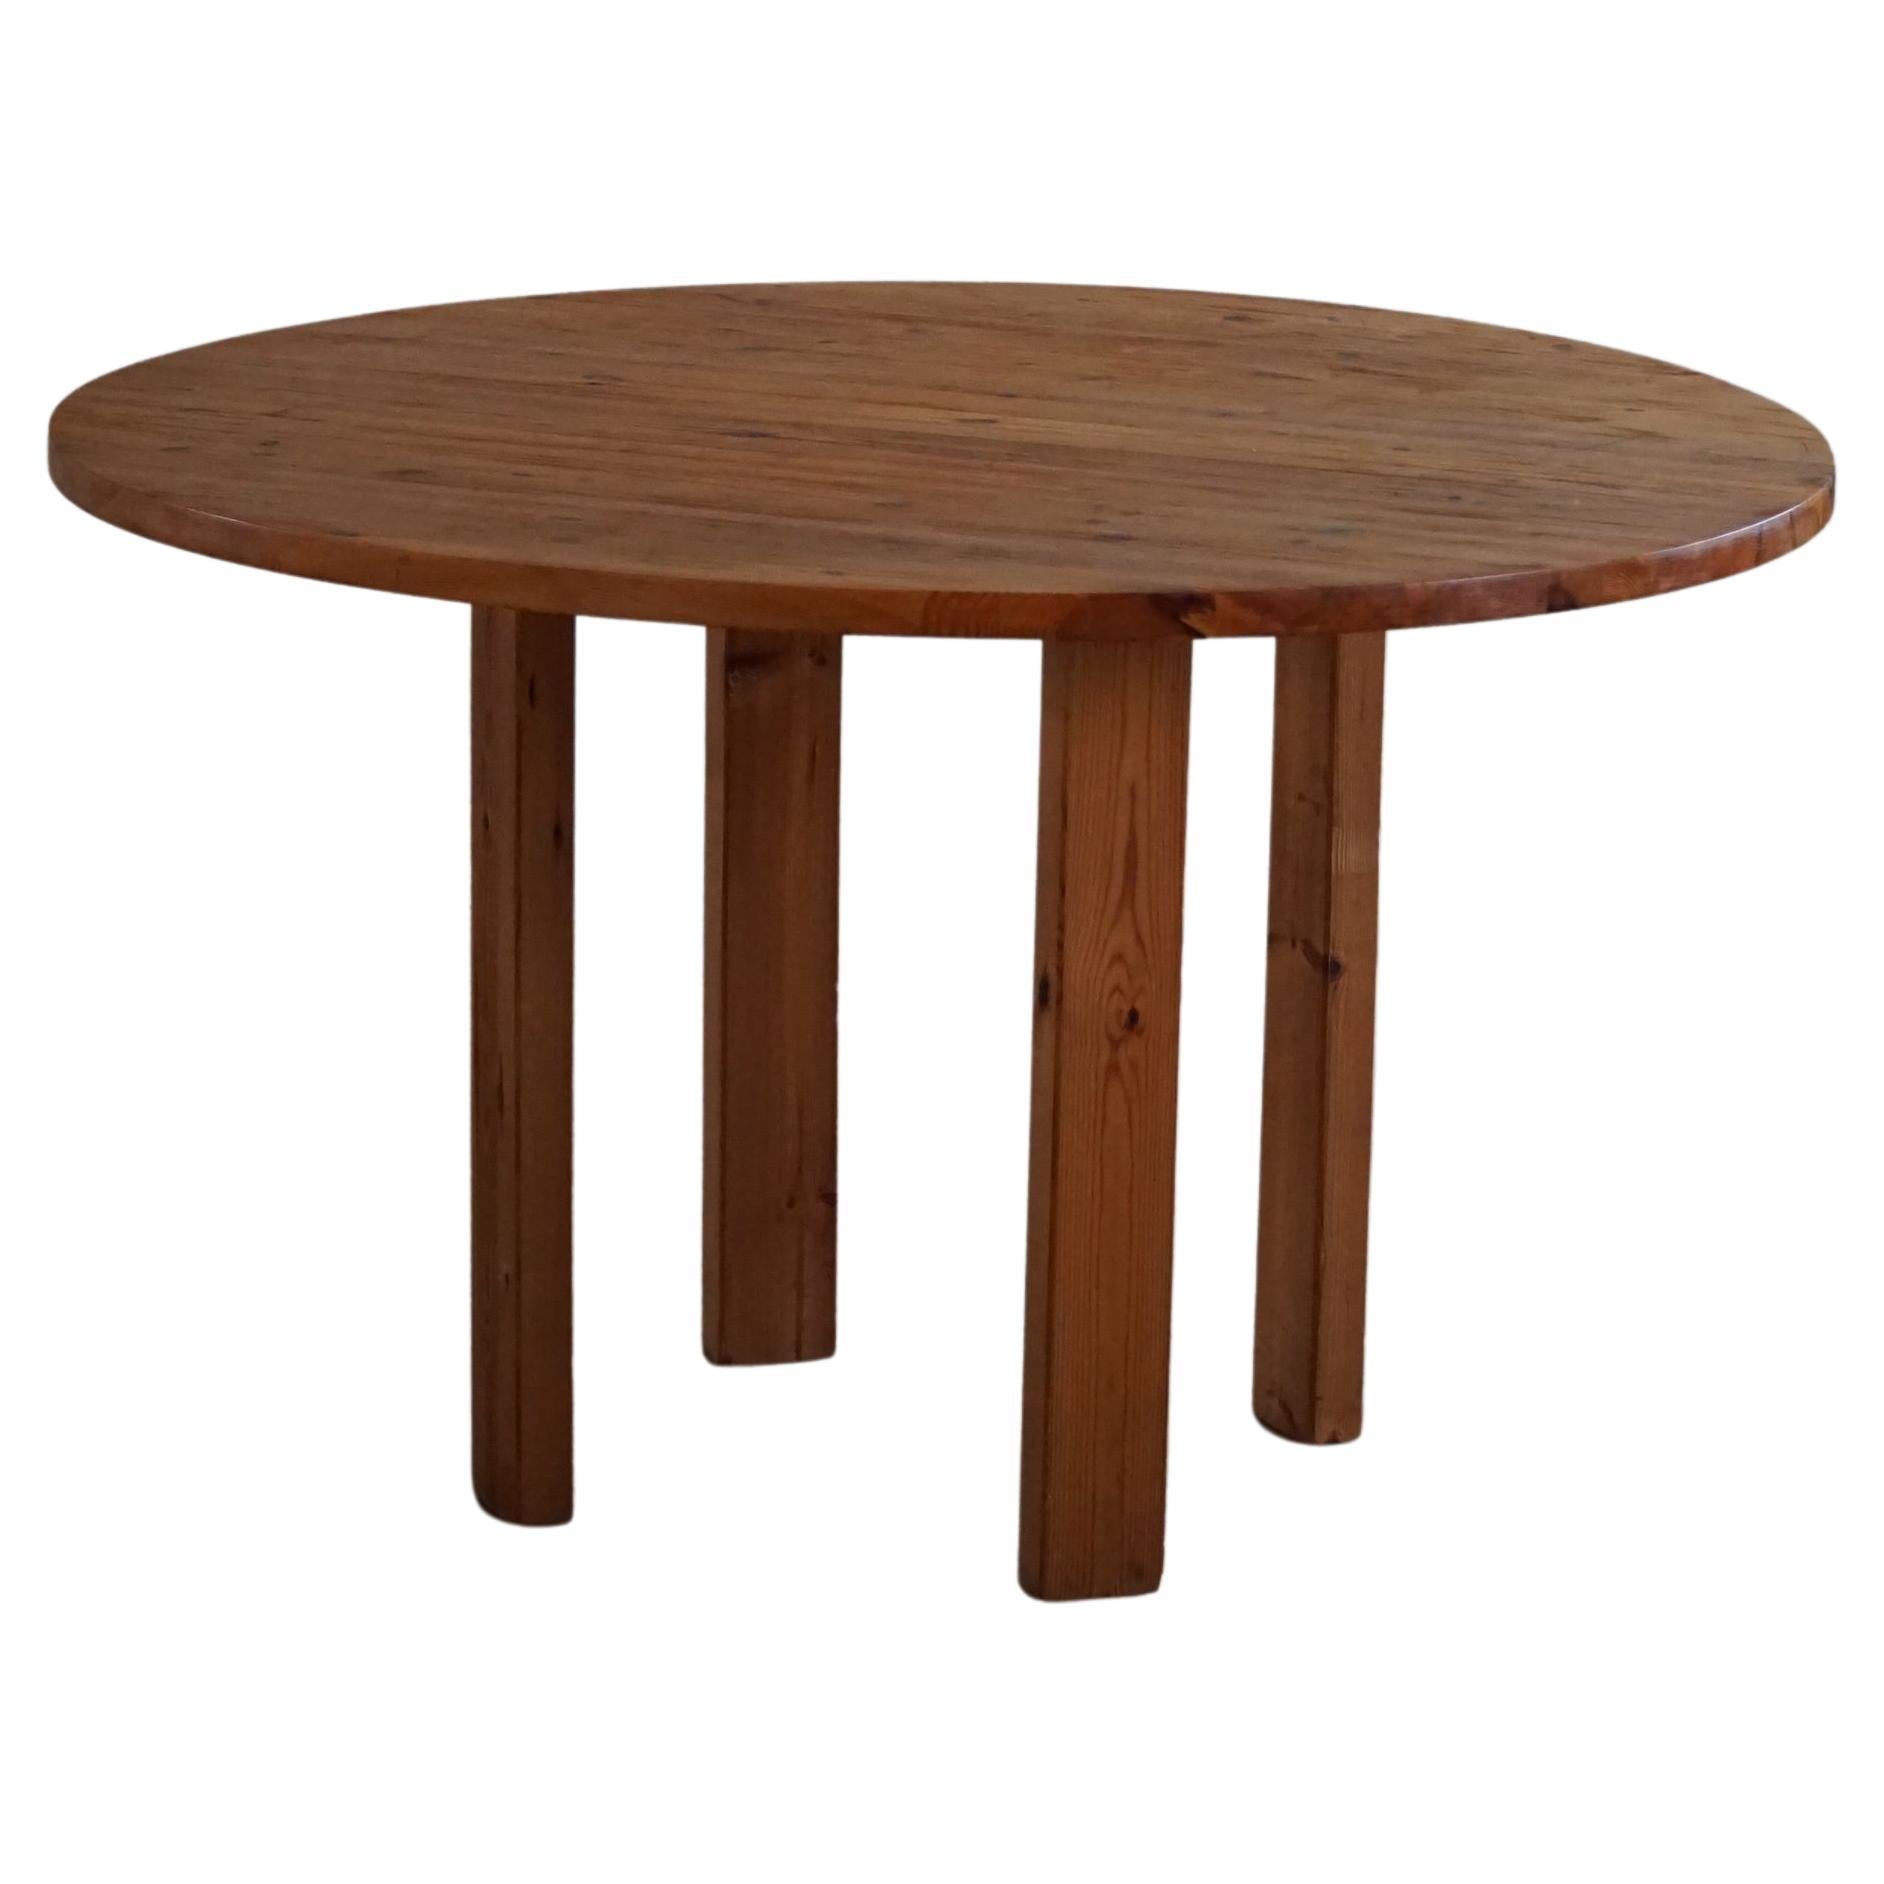 Danish Mid Century Modern, Round Dining Table in Solid Pine, Made in the 1970s For Sale